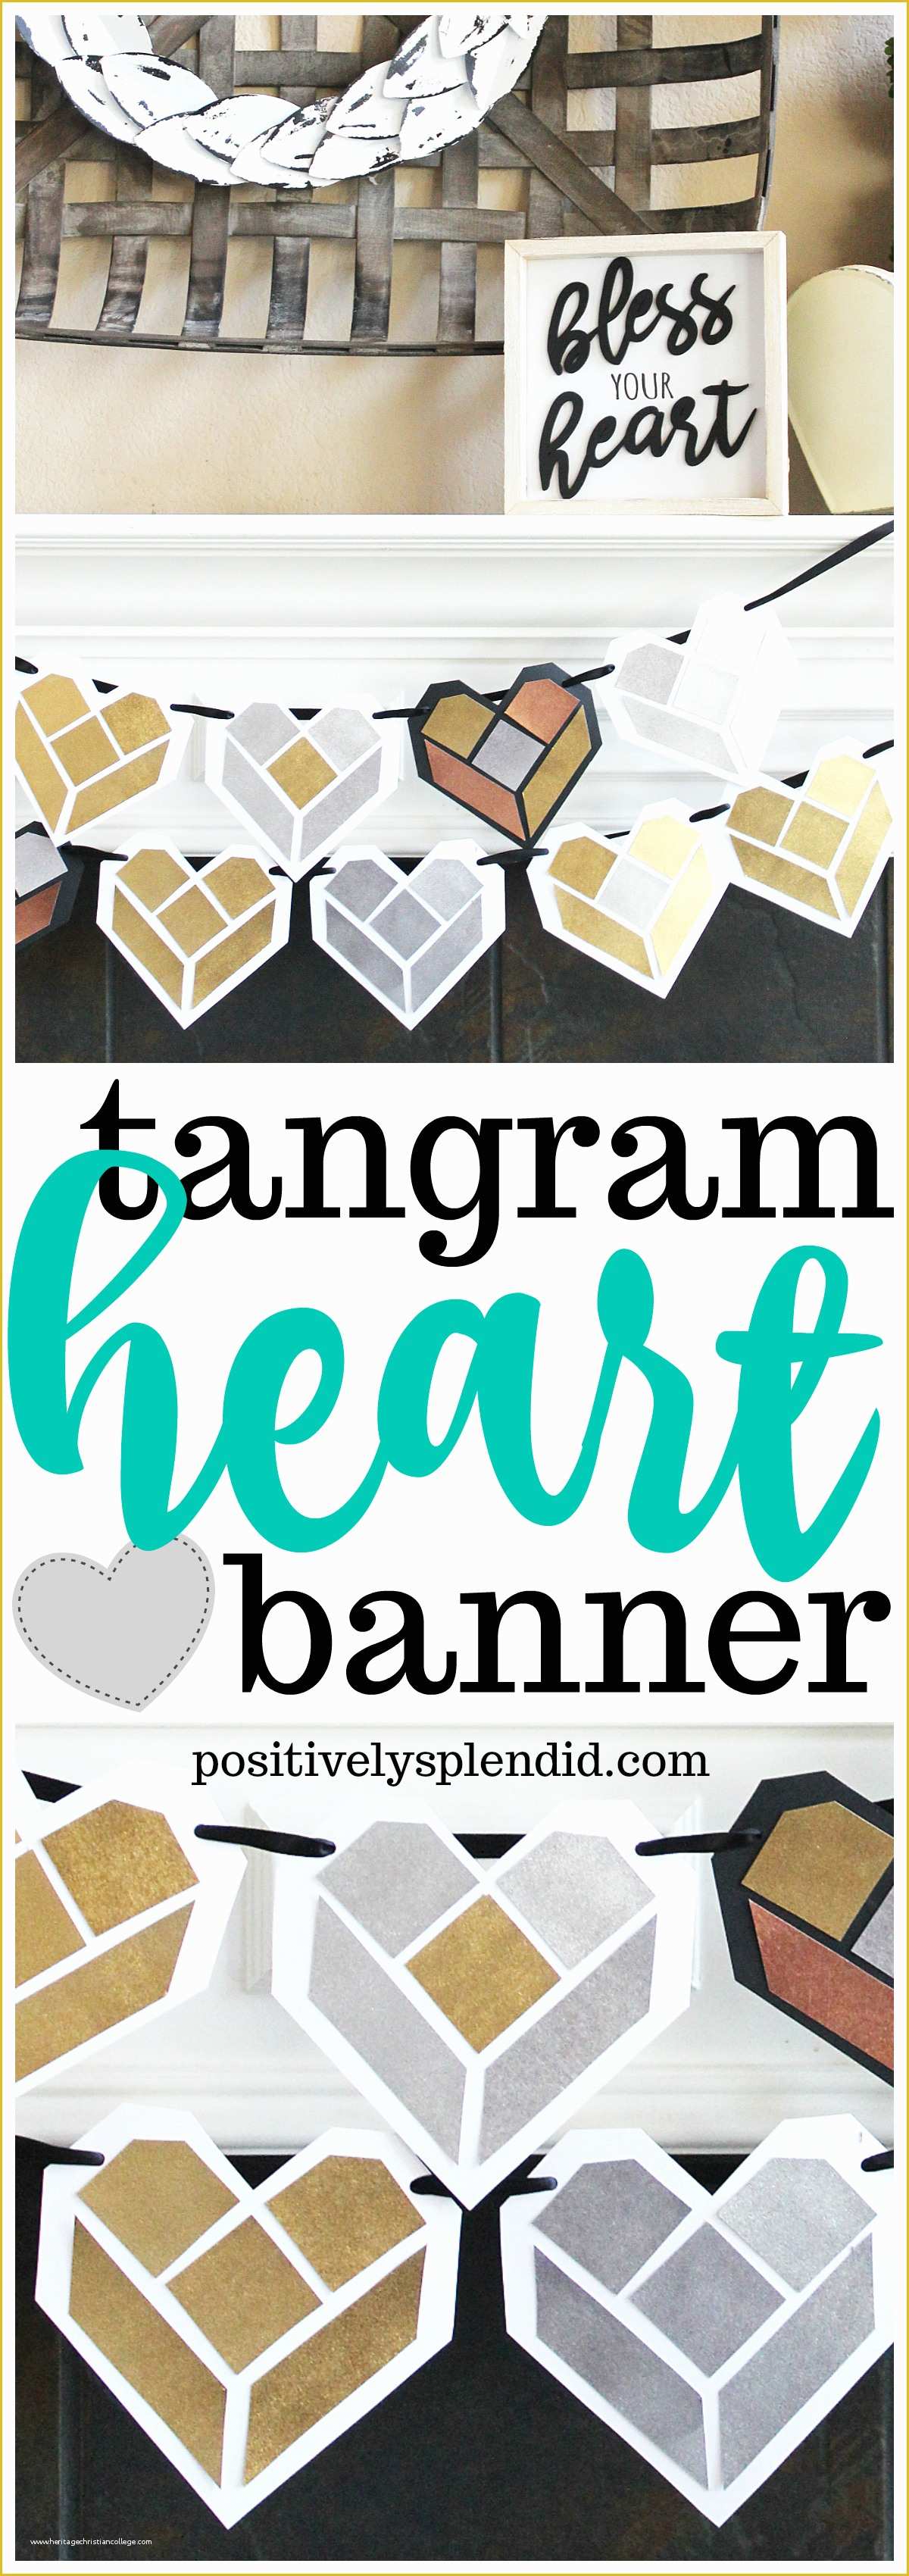 Free Email Banner Templates Of Tangram Heart Valentine Banner with Free Printable Templates